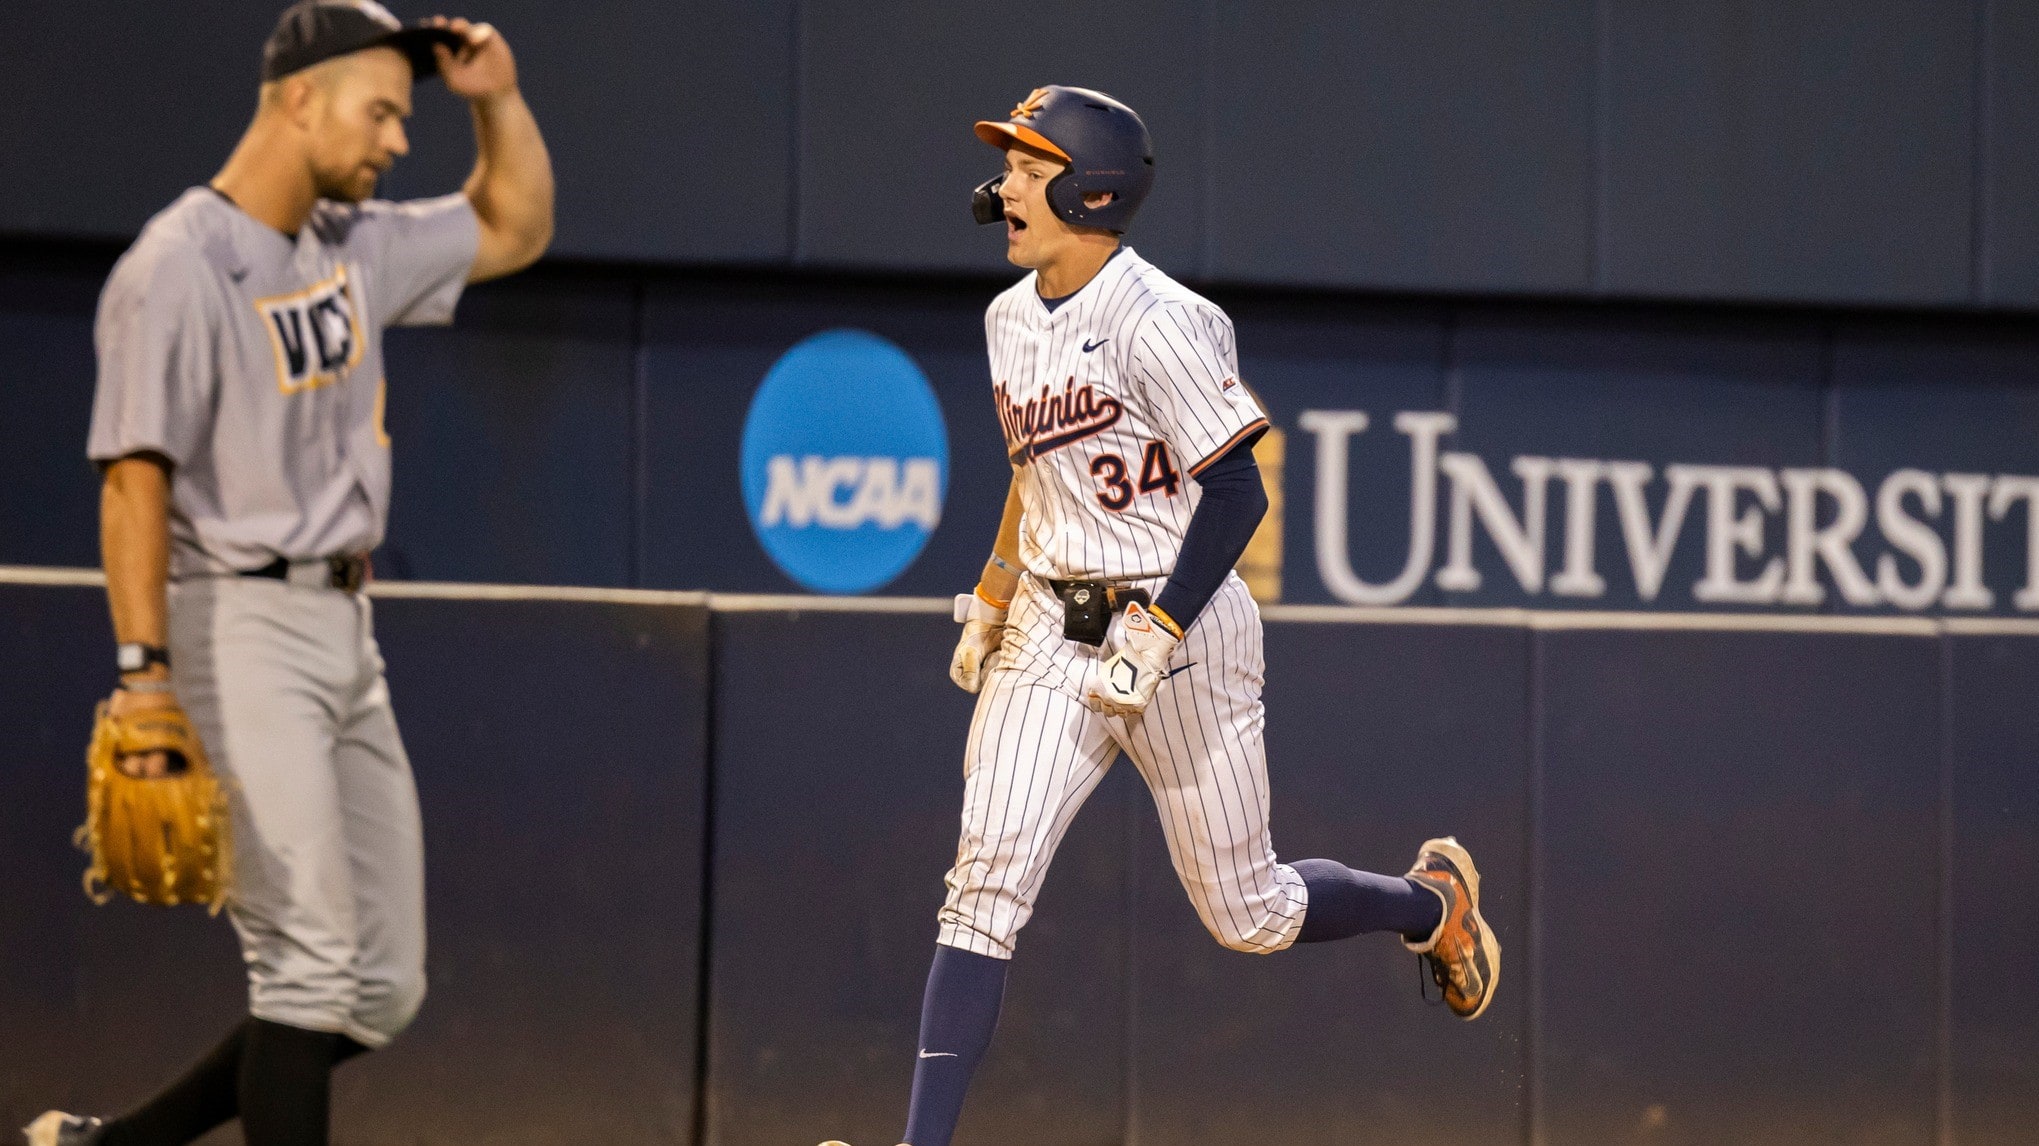 Harrison Didawick rounds the bases after hitting a home run during the Virginia baseball game against VCU at Disharoon Park.